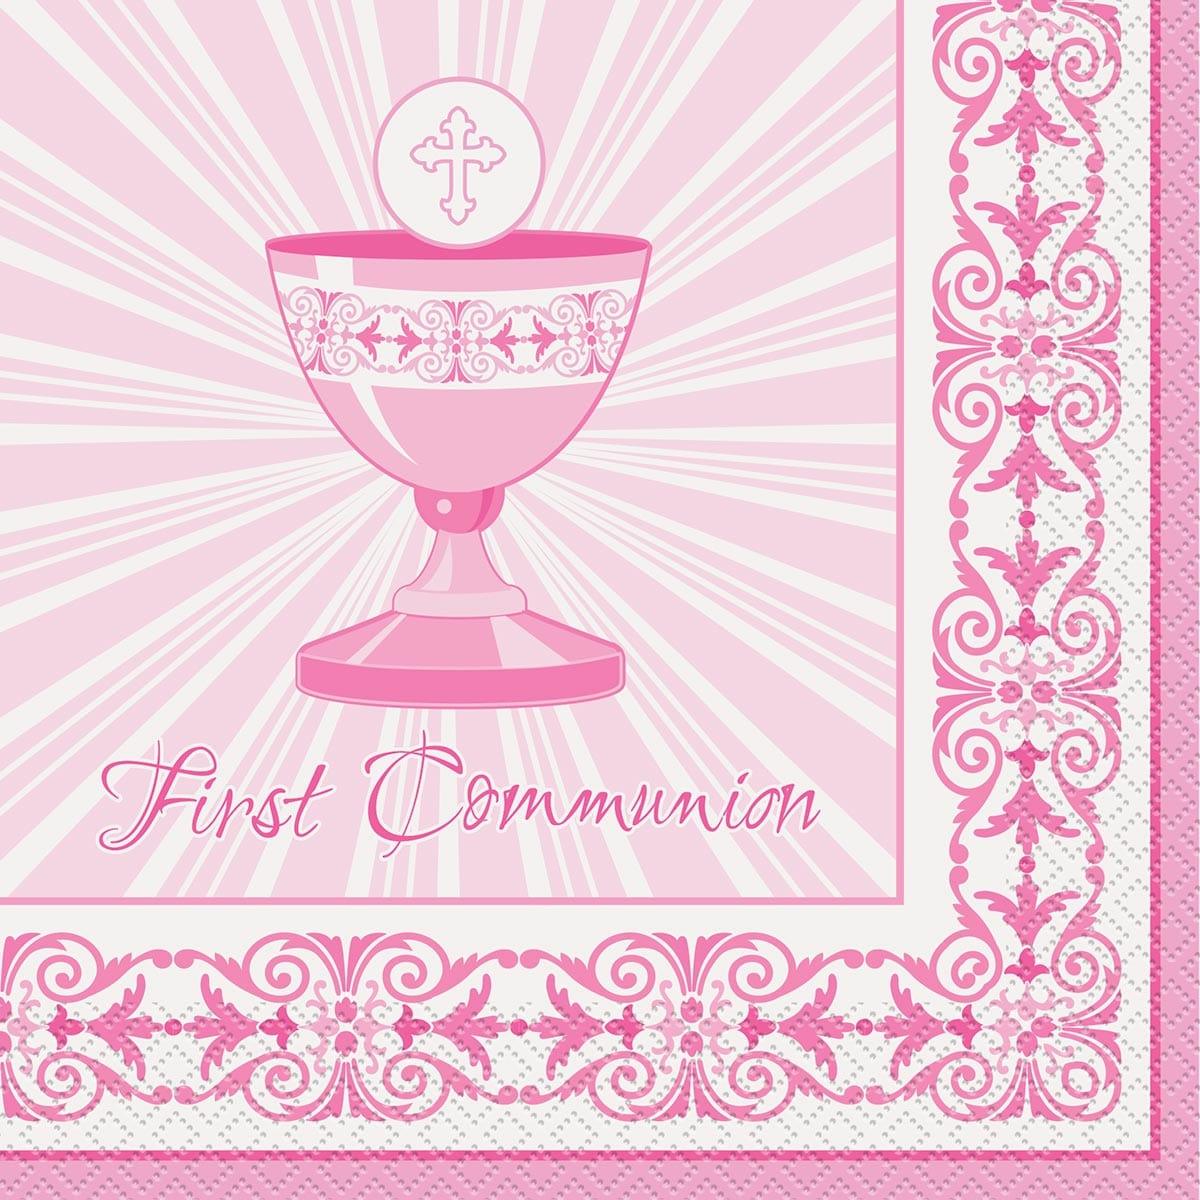 Buy Religious Lunch Napkins 1st Communion - Pink 16/pkg. sold at Party Expert